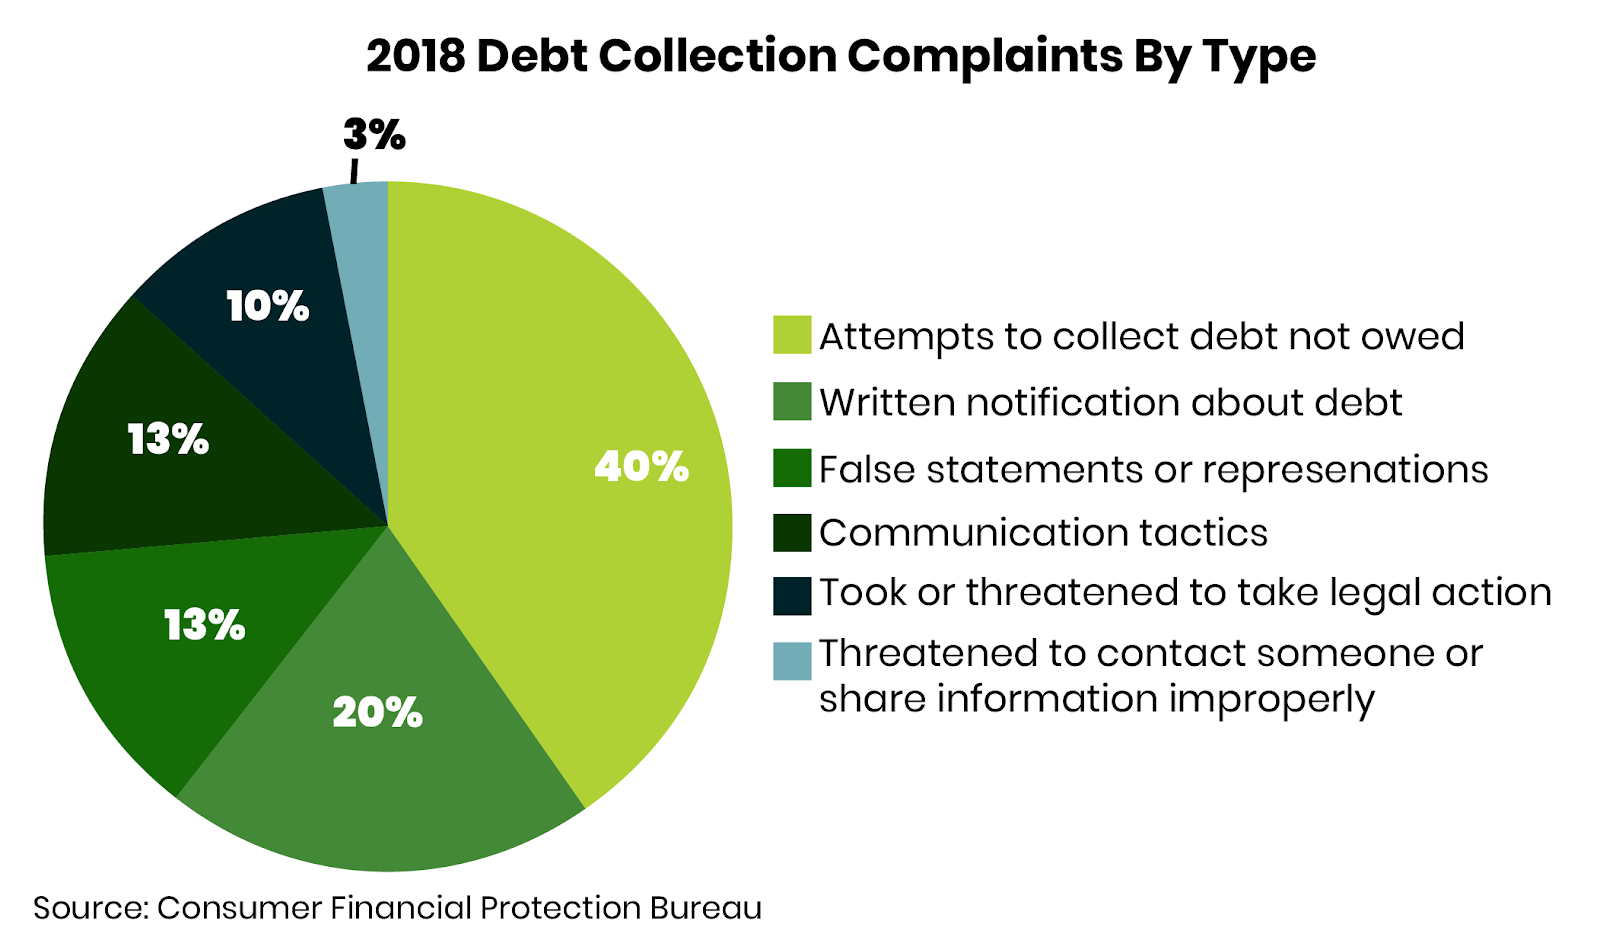 Debt collection complaints by type